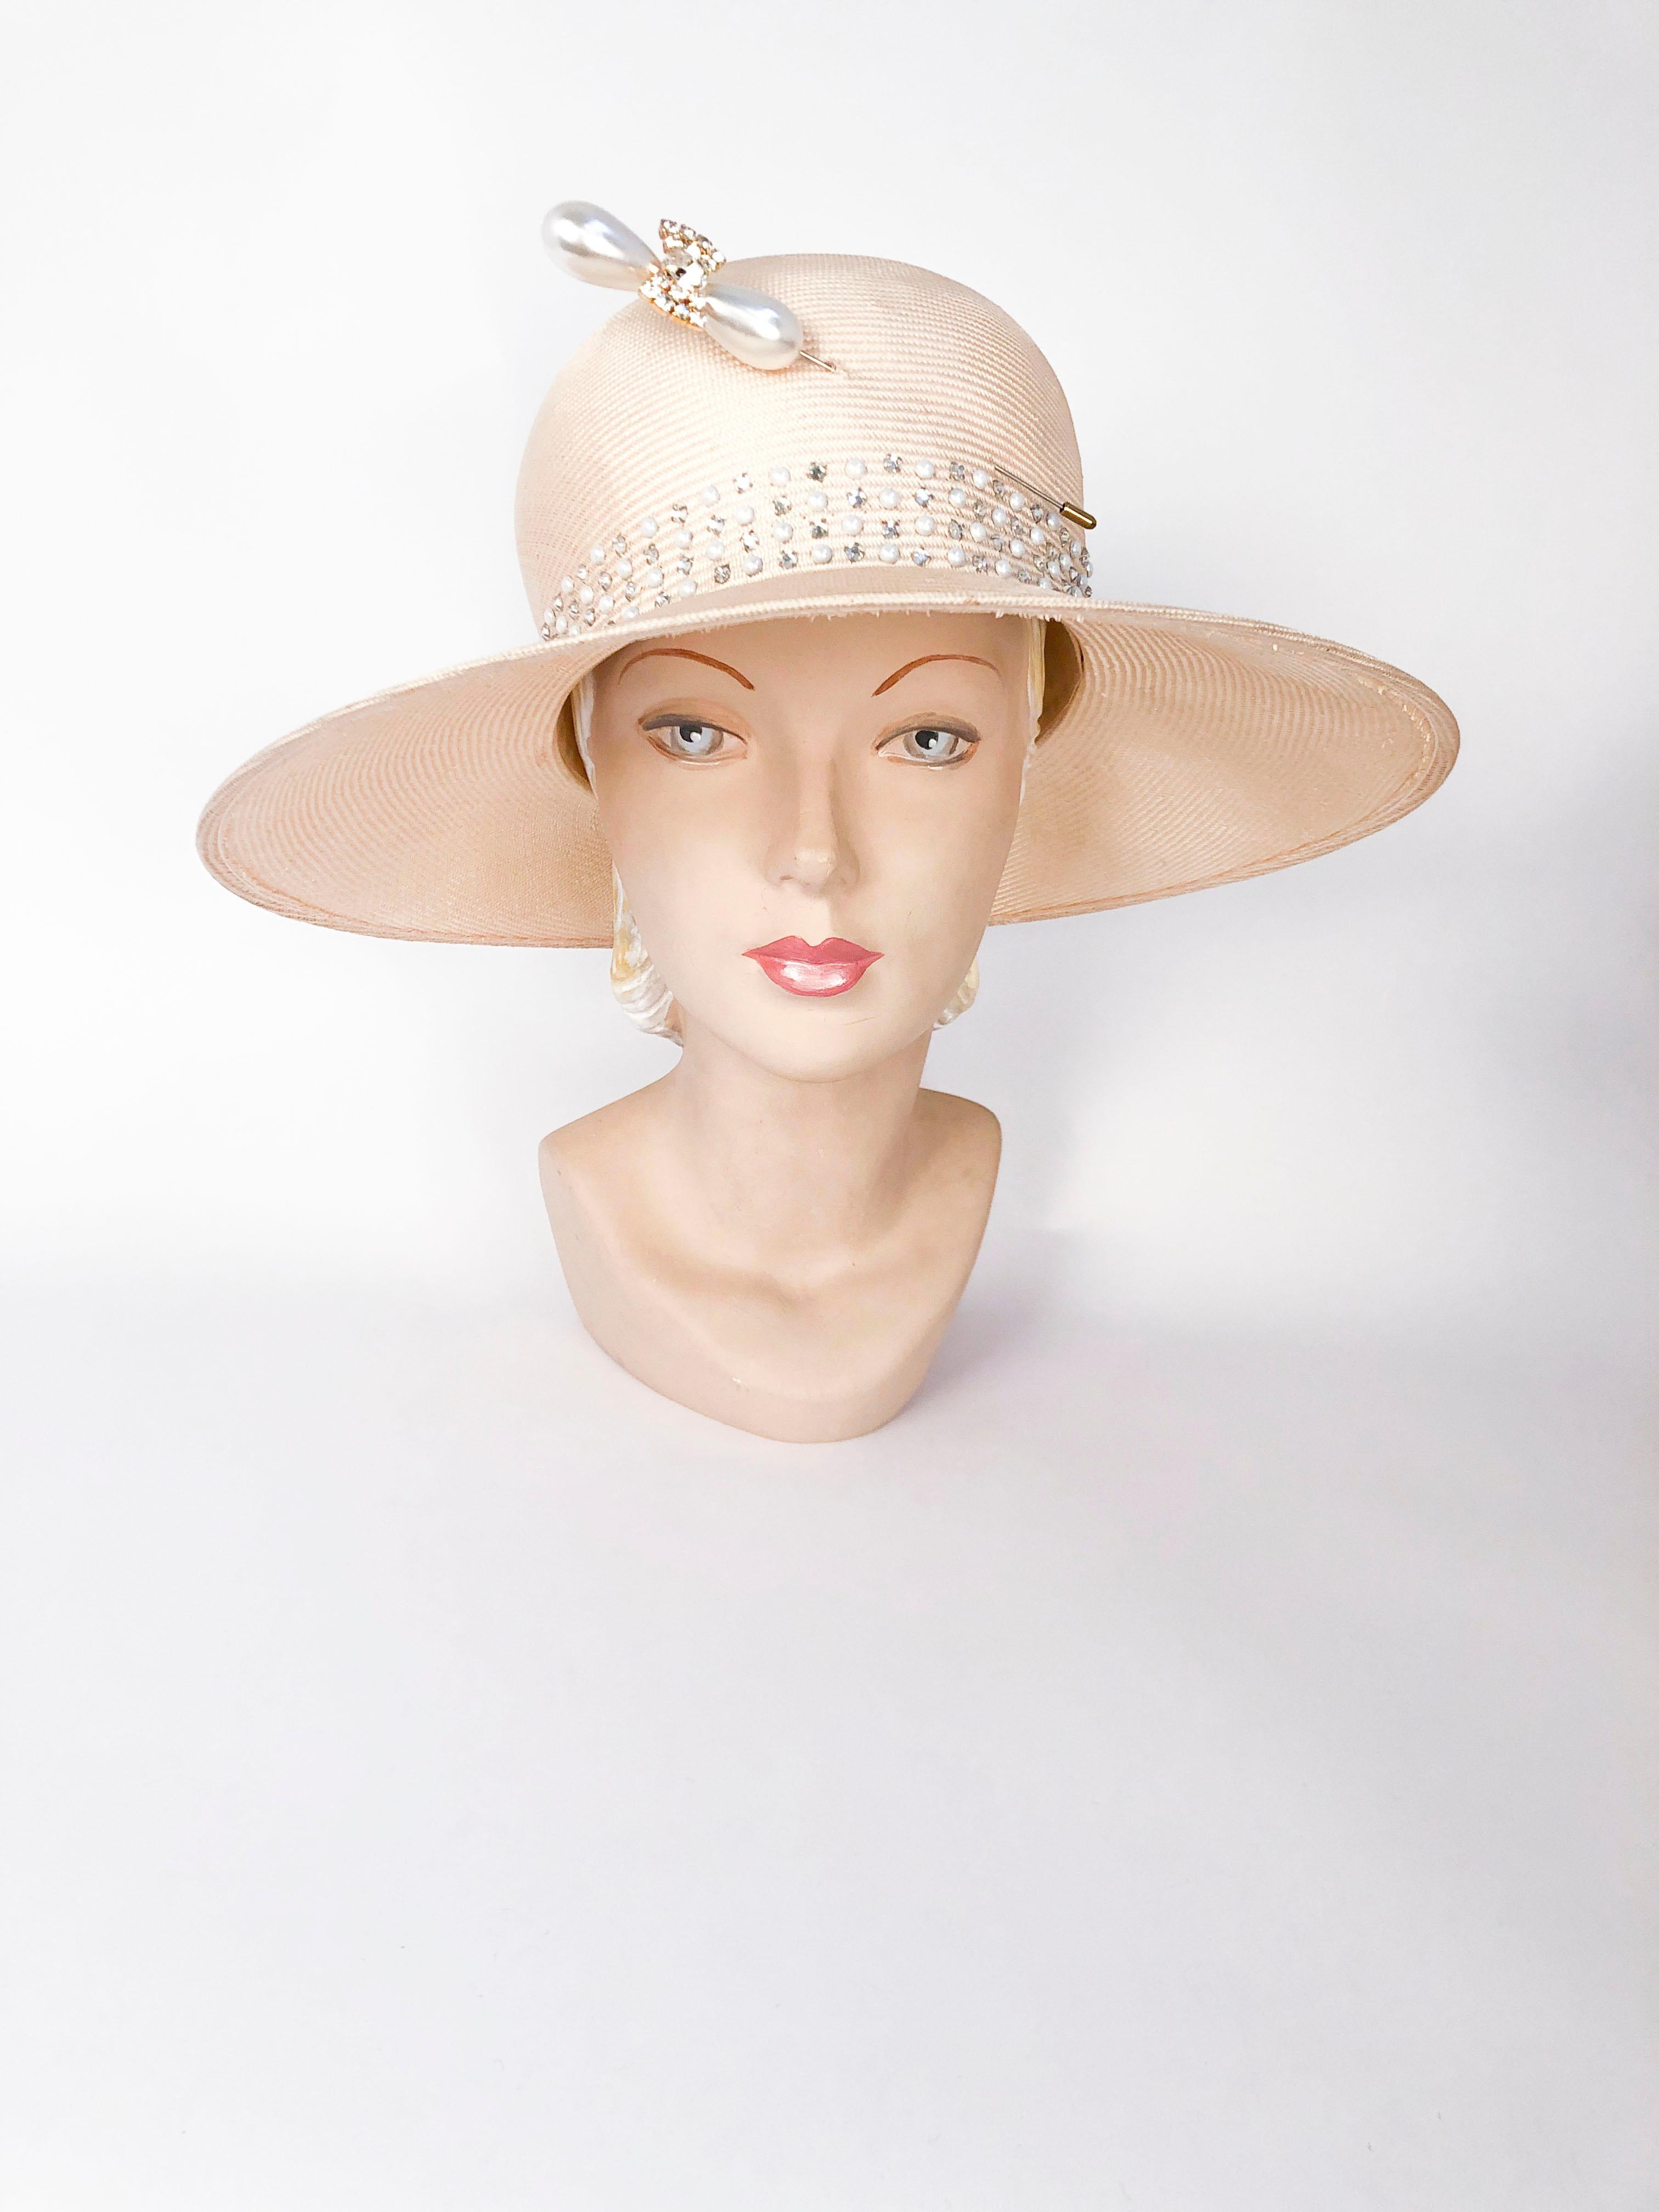 1980's Straw wide-brim sun hat with pearl and rhinestone accents and a large decorative hat pin.

22 inch interior circumference.